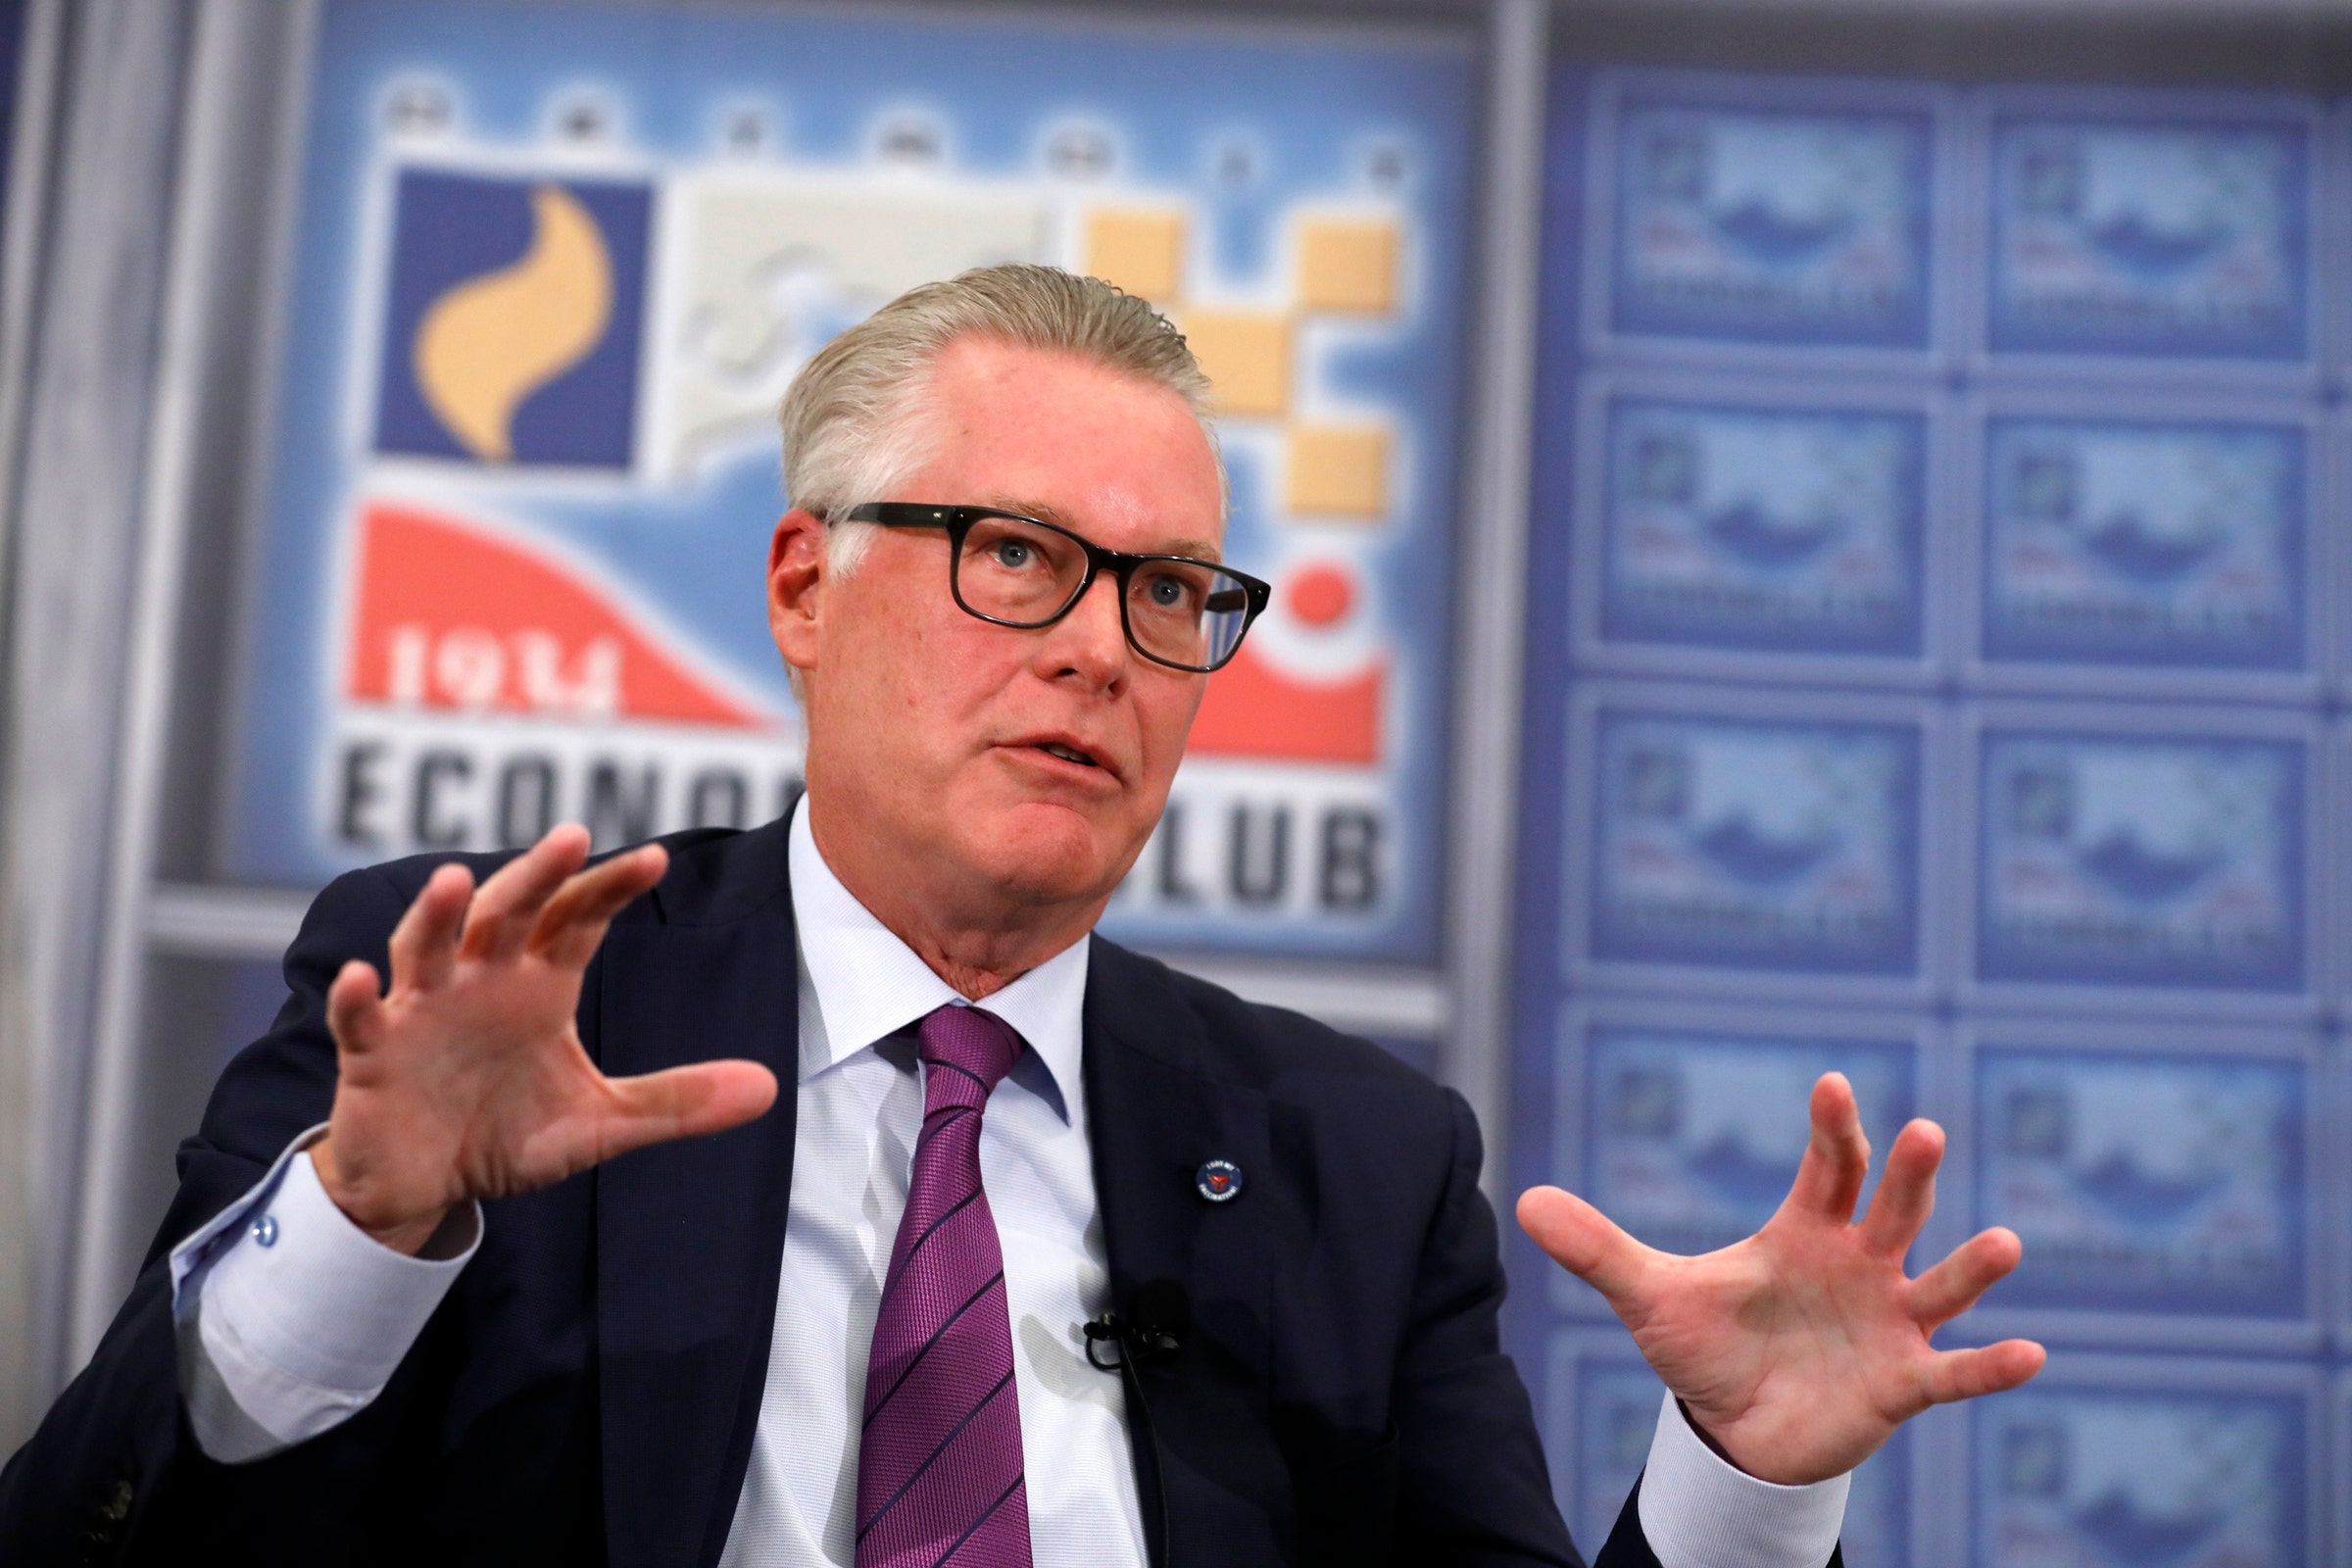 Why Delta's CEO Is Optimistic About Leisure, Business Travel: 'There's Enormous Pent-Up Demand'